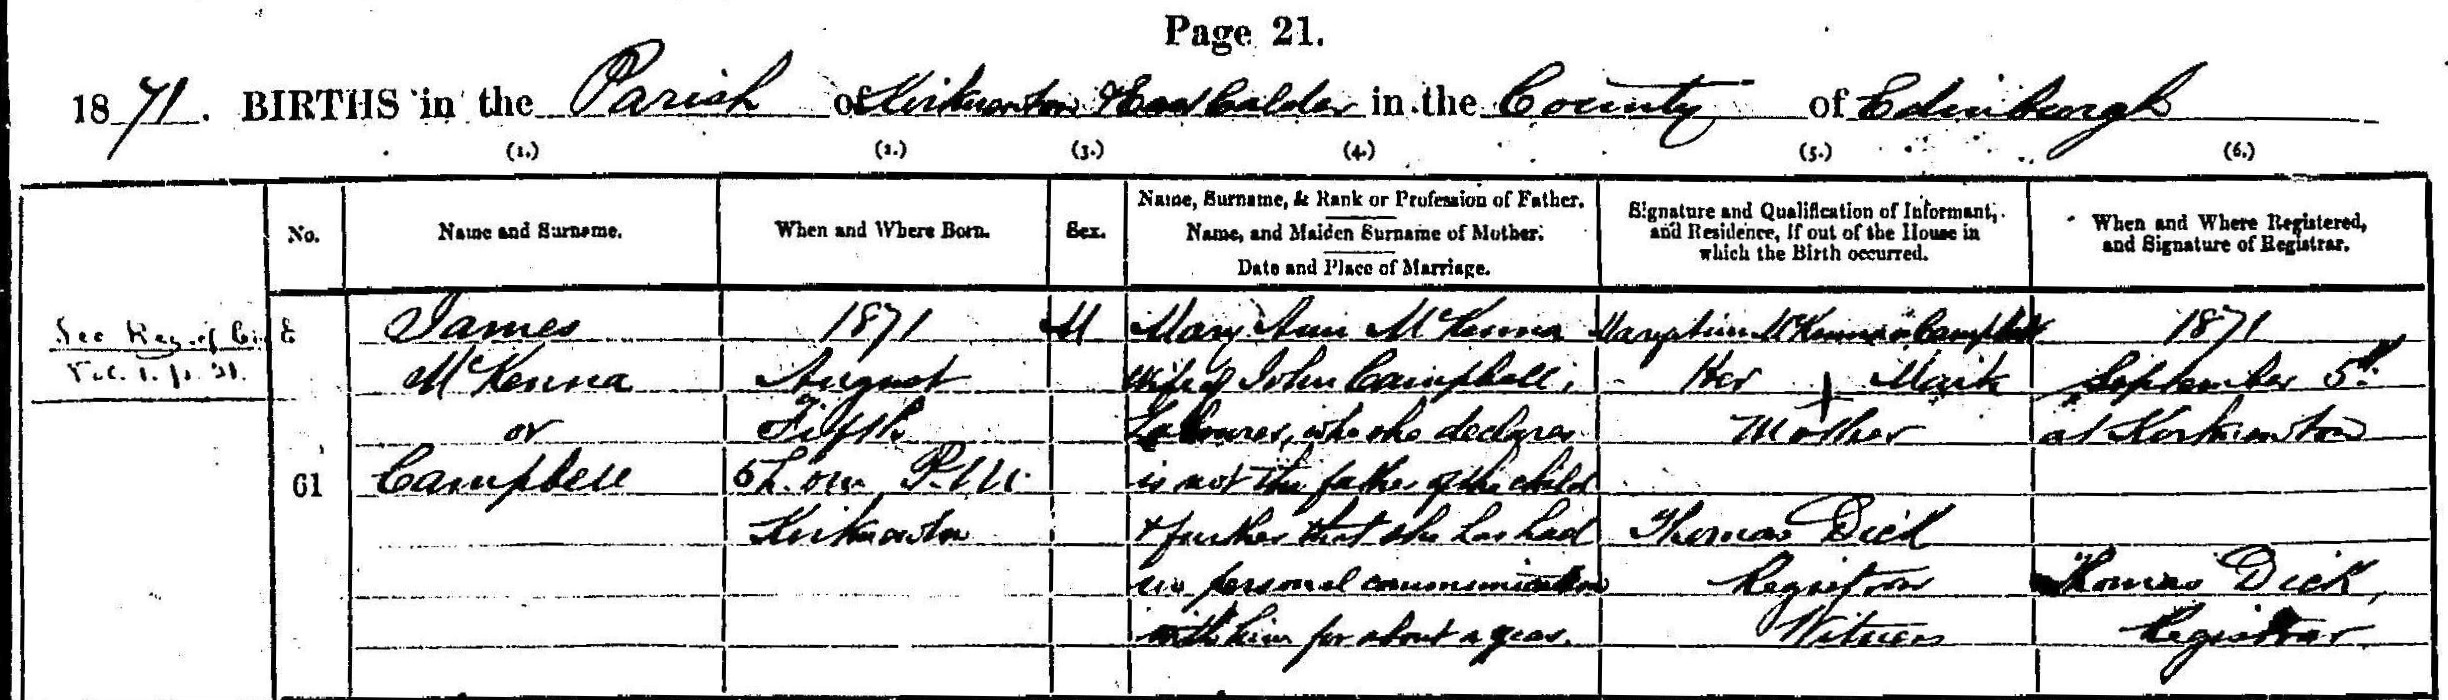 James McKenna or Campbell’s birth entry, 1871. 